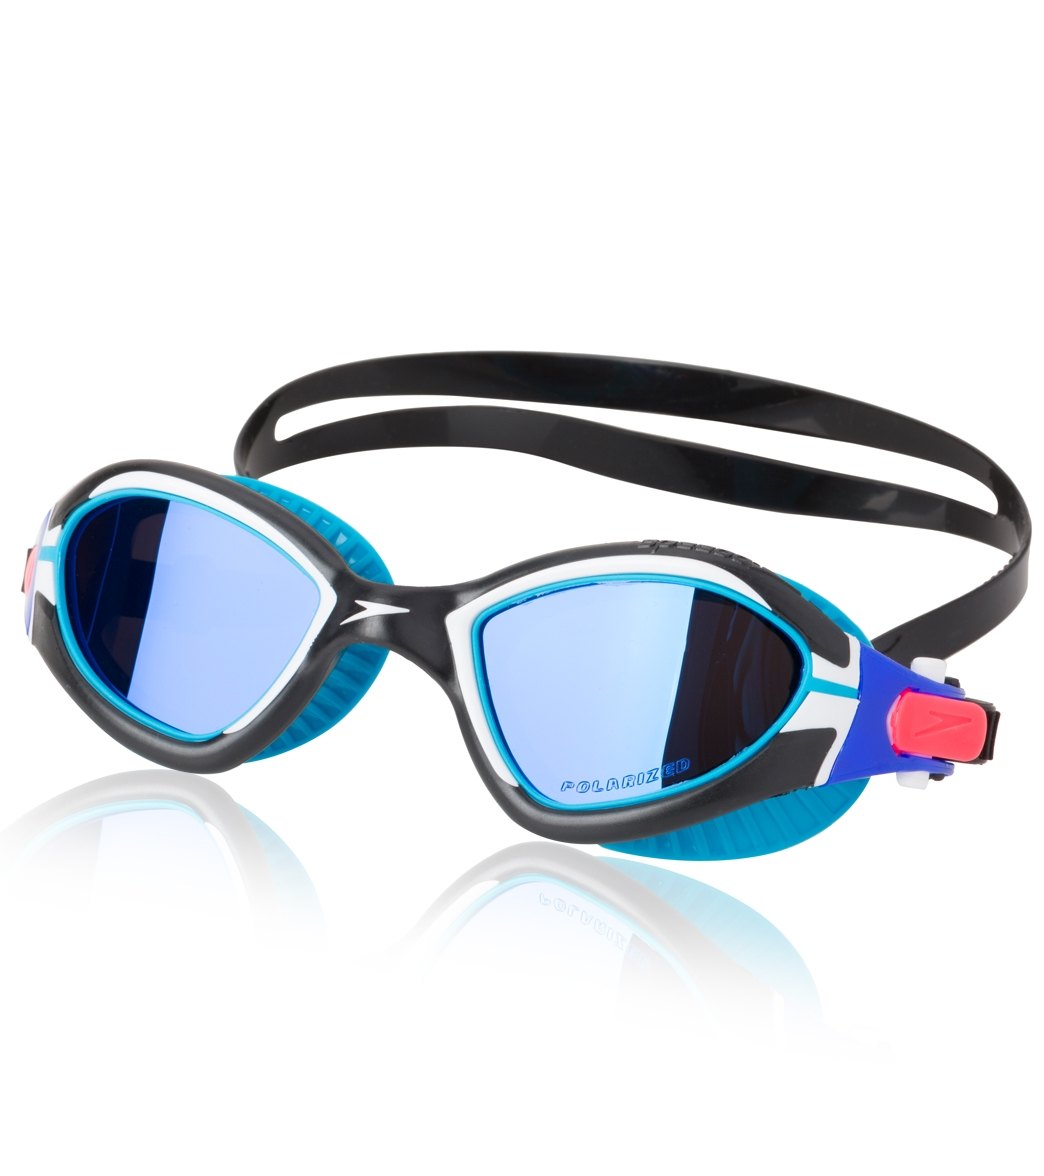 Speedo MDR 2.4 Polarized Goggle at SwimOutlet